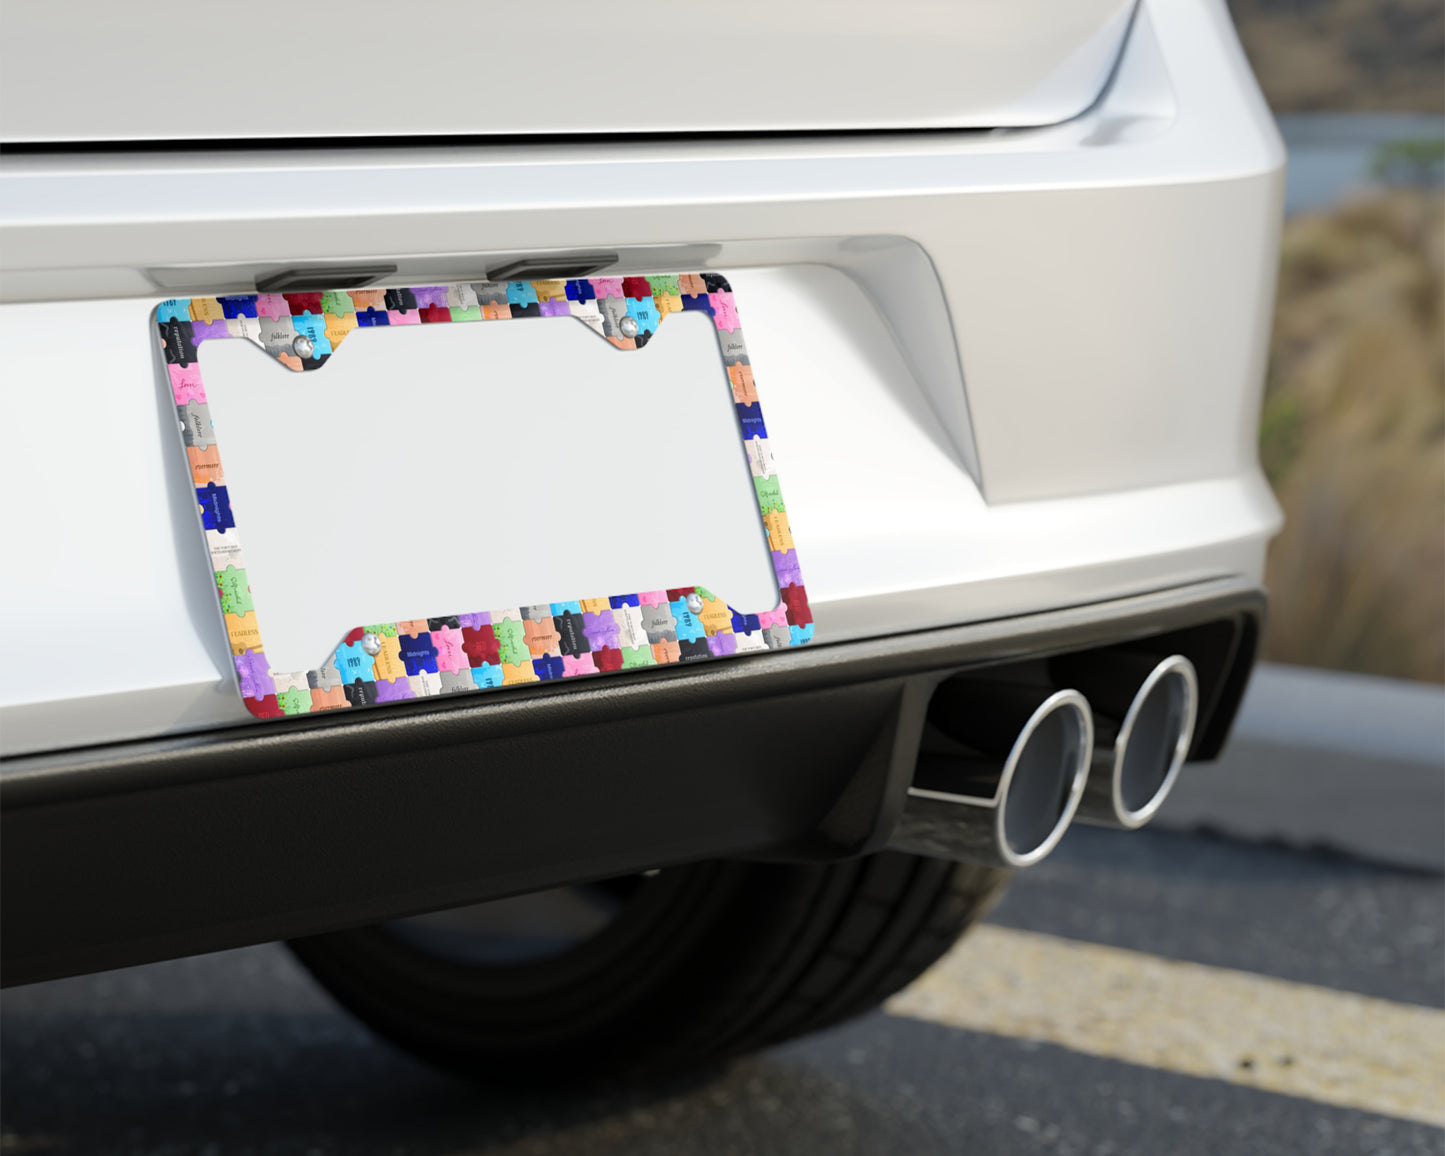 The Eras puzzles license plate frame